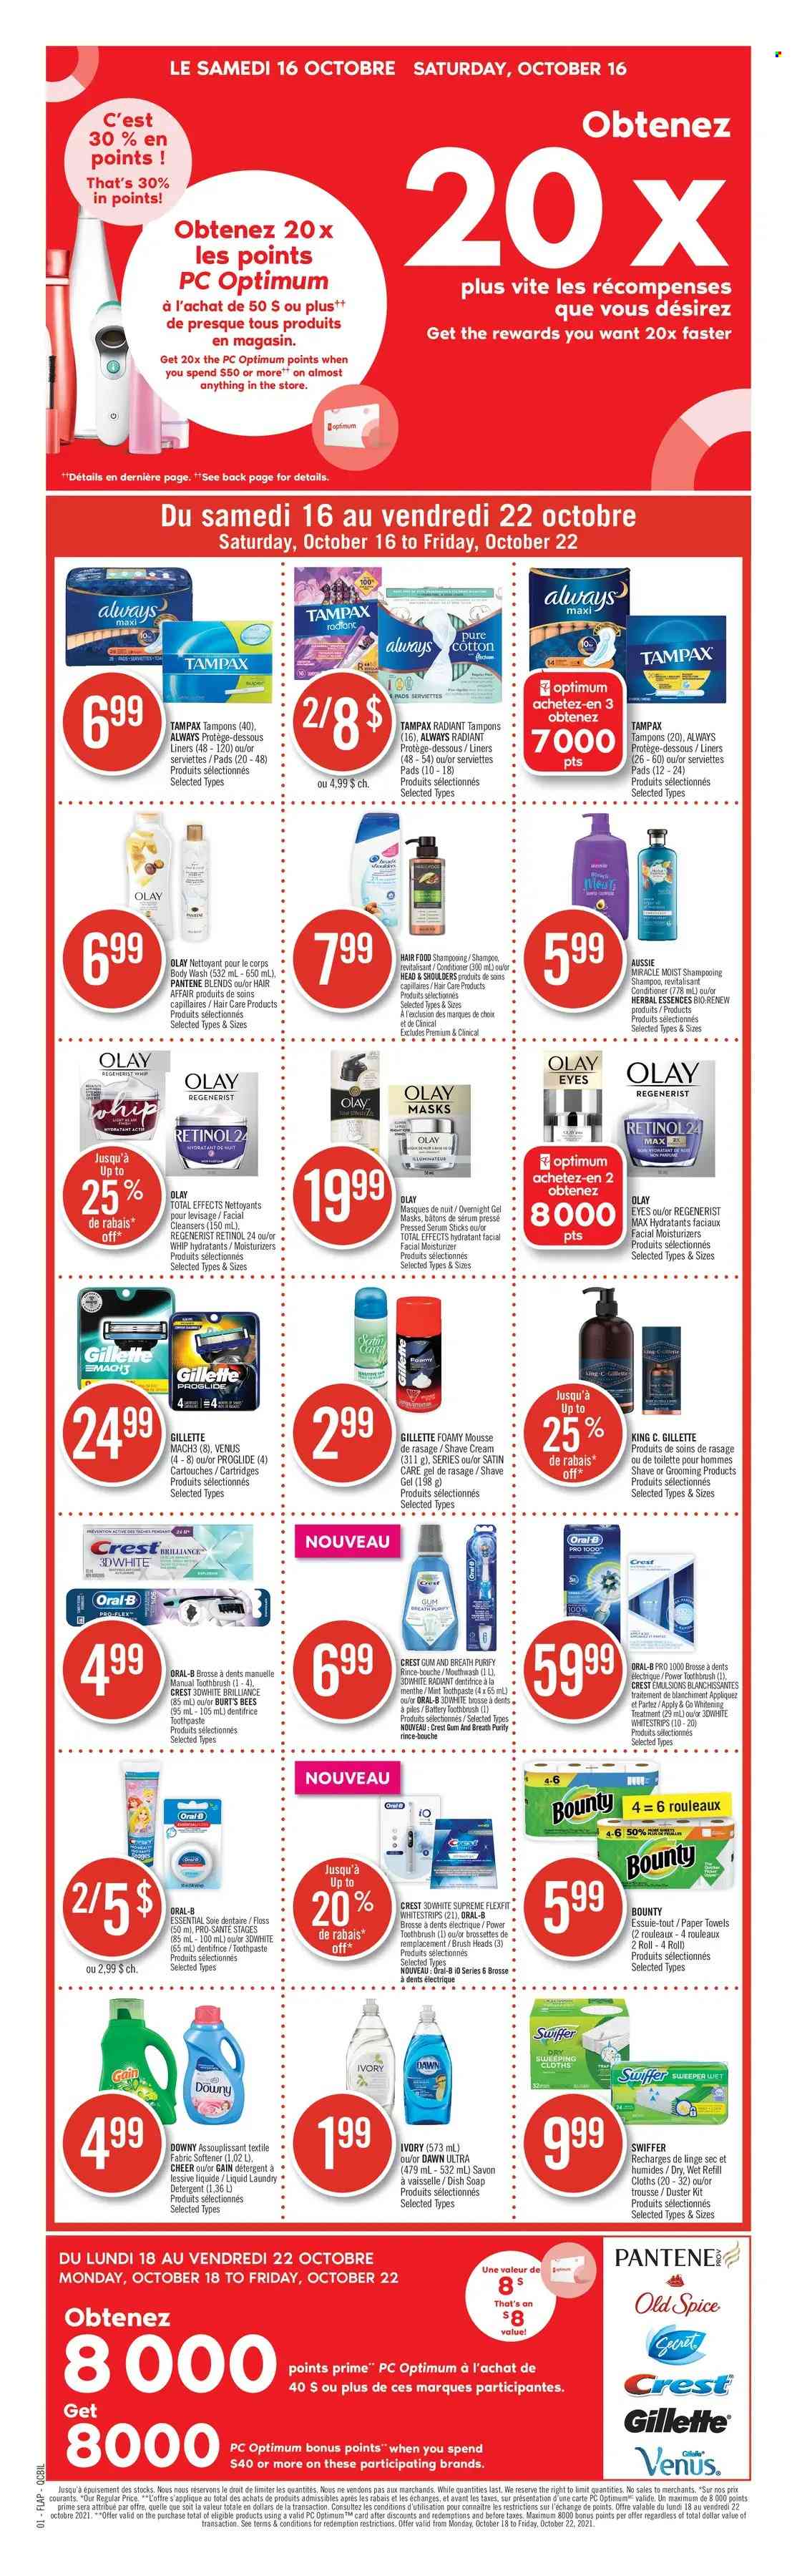 thumbnail - Pharmaprix Flyer - October 16, 2021 - October 22, 2021 - Sales products - Bounty, spice, kitchen towels, paper towels, Gain, Swiffer, fabric softener, laundry detergent, body wash, soap, toothbrush, toothpaste, mouthwash, Crest, tampons, moisturizer, serum, Olay, Aussie, conditioner, Herbal Essences, shave gel, Venus, shave cream, duster, pendant, detergent, Gillette, shampoo, Tampax, Head & Shoulders, Pantene, Old Spice, Oral-B. Page 15.